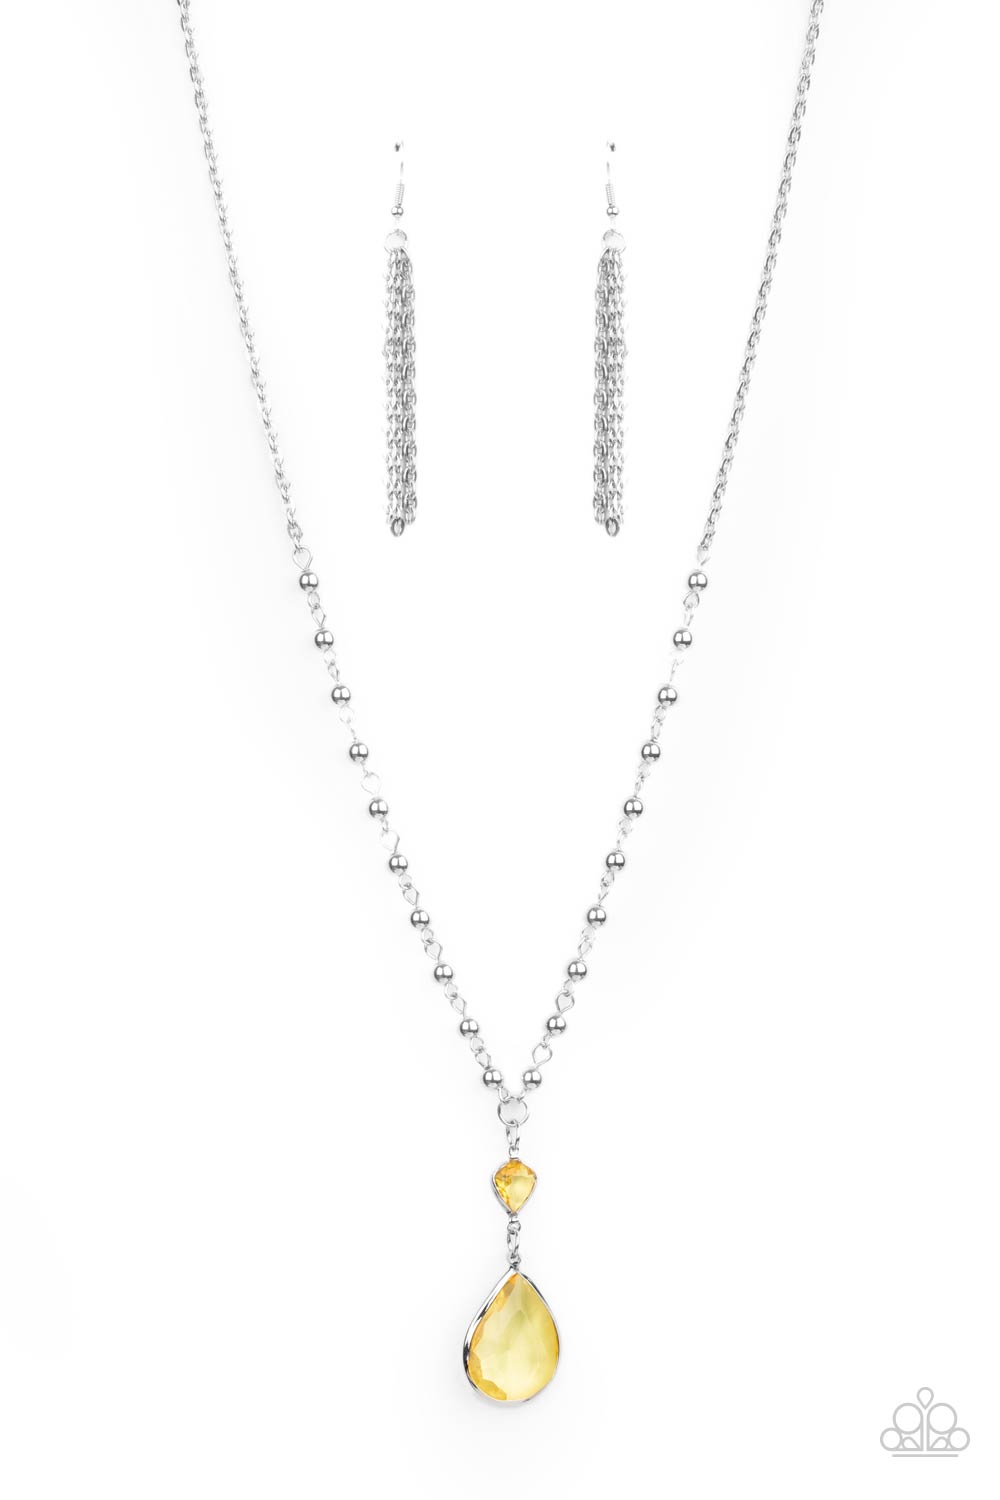 Titanic Splendor - Yellow Primrose Gem and Silver Necklace - Paparazzi Accessories - Primrose teardrop gem dangles from a lengthened silver chain. A small heart-shaped Primrose gem and shiny round beads accentuate the majestic fashion look of this necklace.